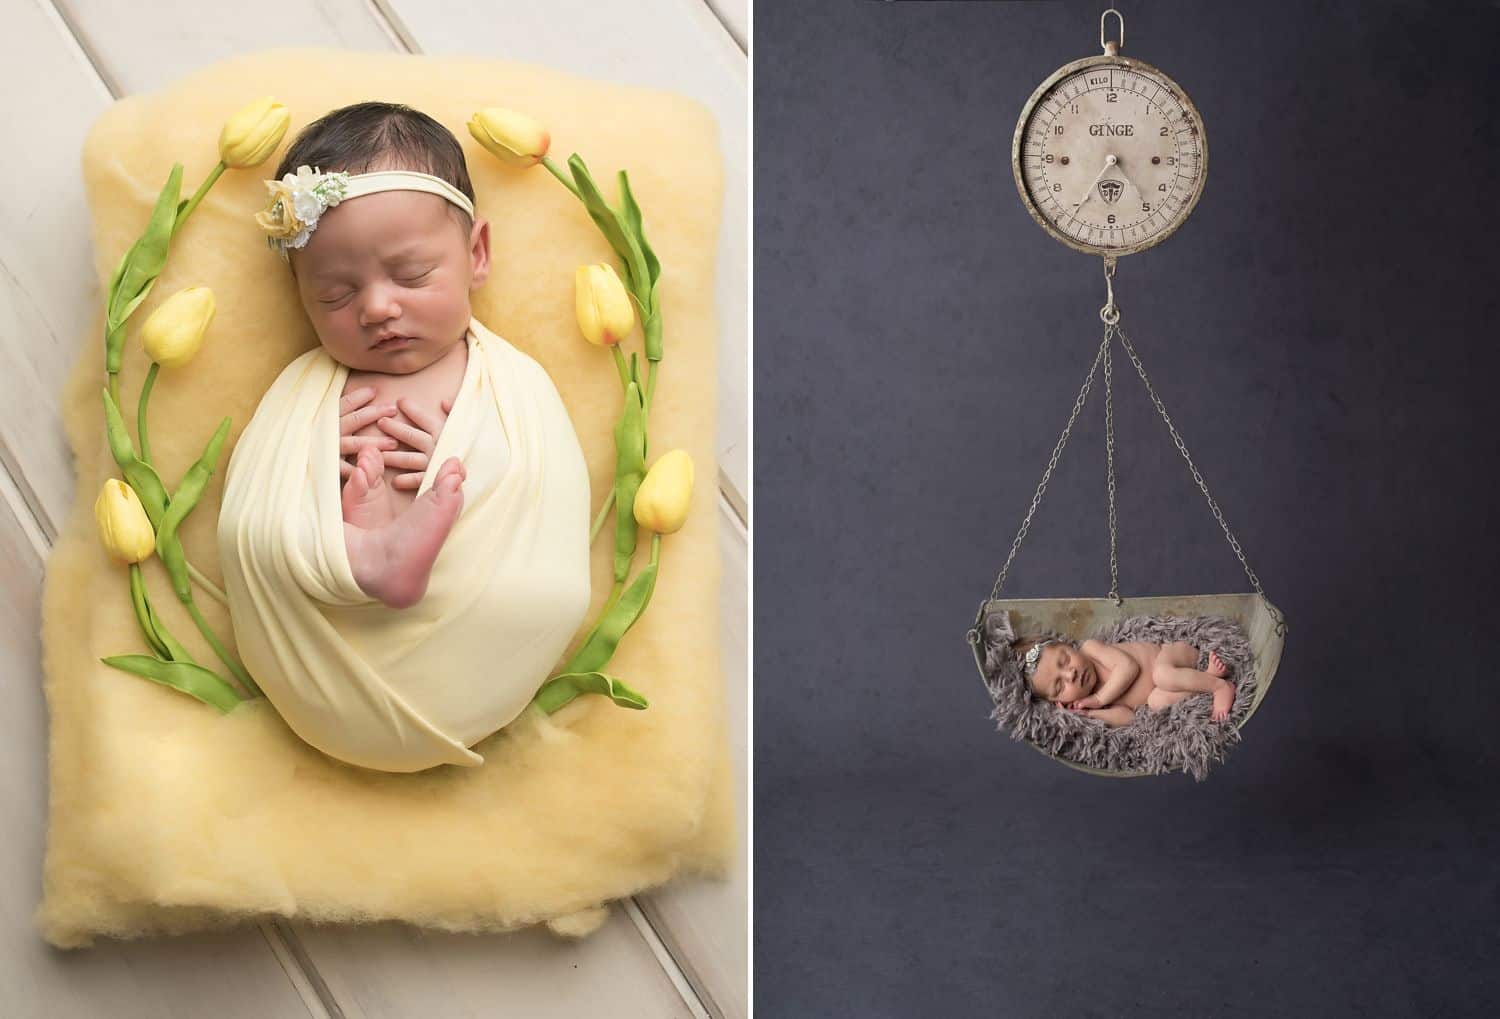 Use the best newborn photography props to make photos like these! #1: a baby swaddled in yellow lies atop a golden foam cushion surrounded by tulips. #2: A naked newborn lies on her side on a gray fur blanket. She is cradled in a giant, silver scale.